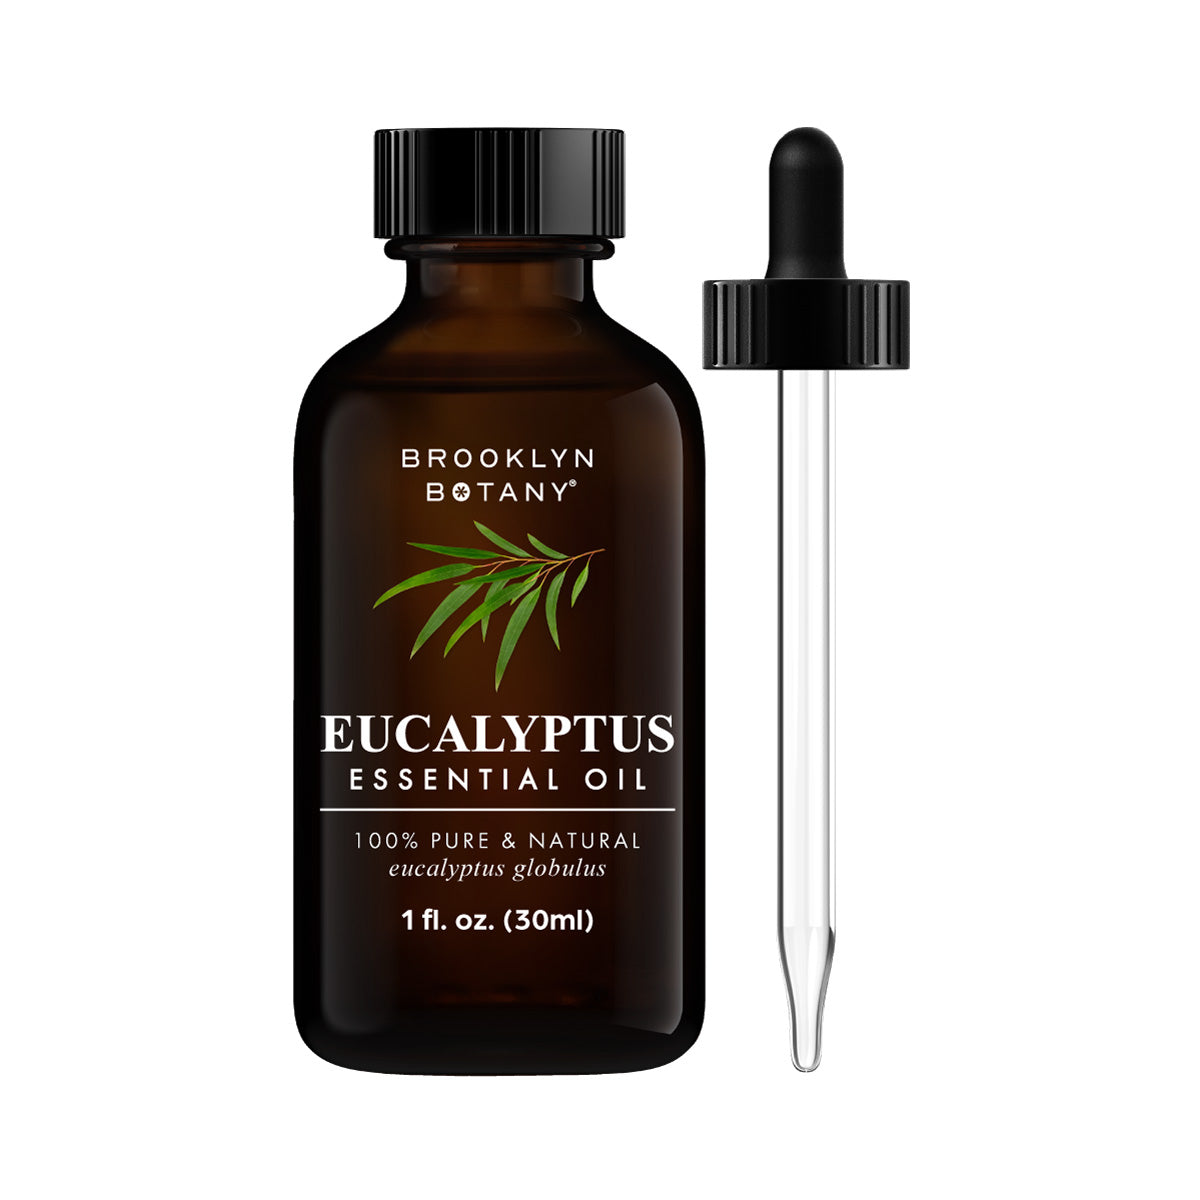 Shopify-BB-30ml-Eucalyptus-Essential-Oil-Main-Image-with-Sides.jpg